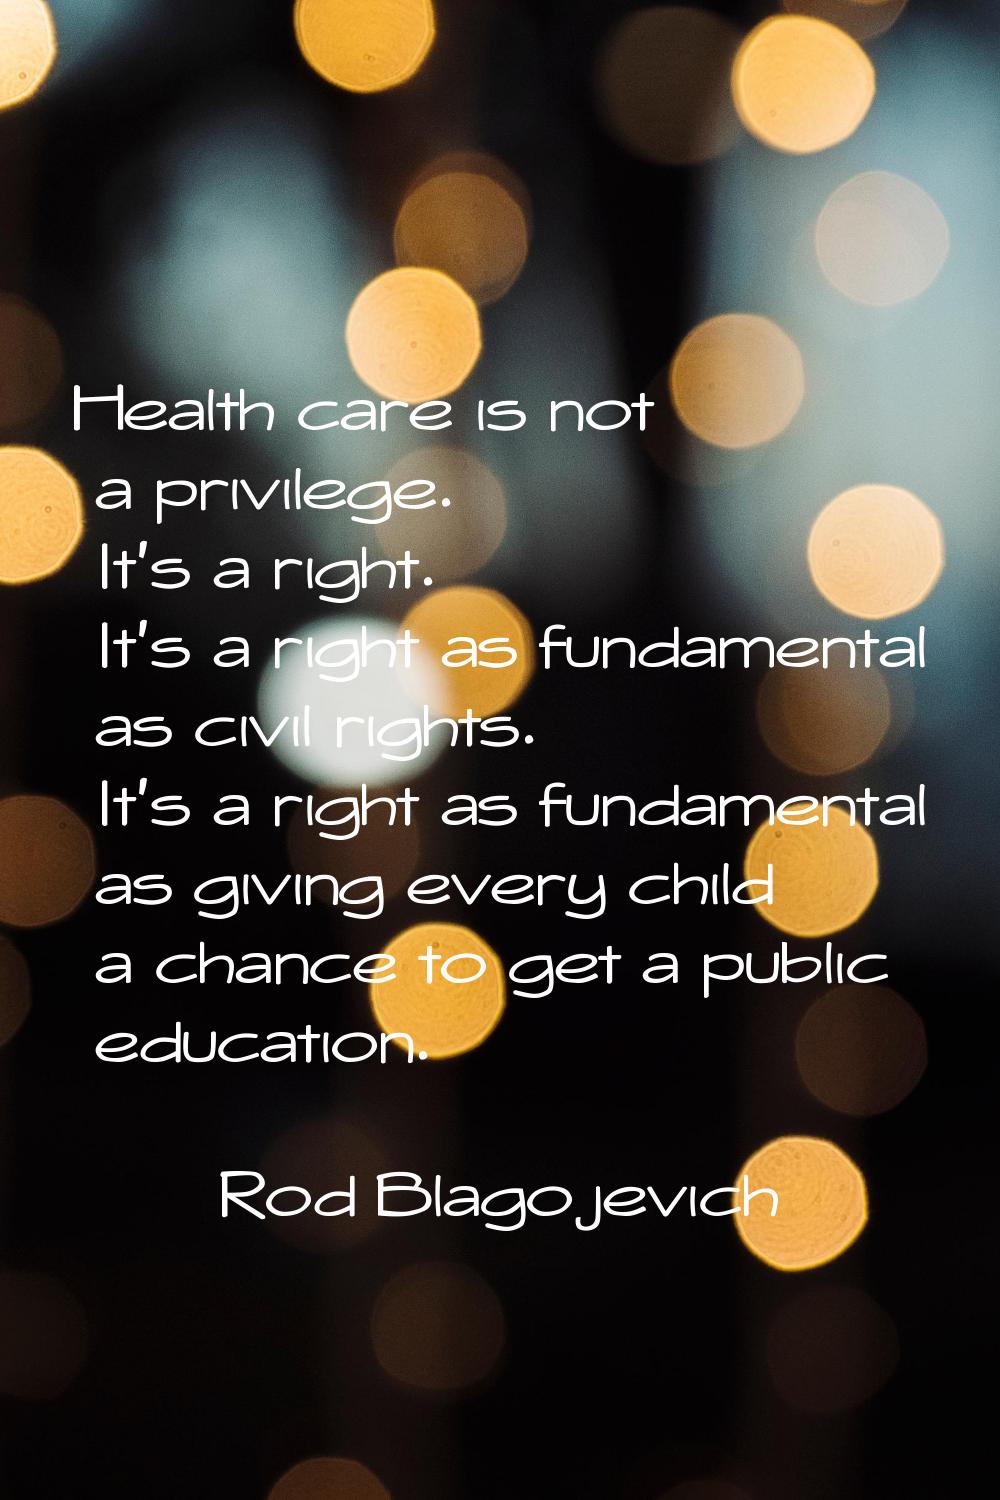 Health care is not a privilege. It's a right. It's a right as fundamental as civil rights. It's a r